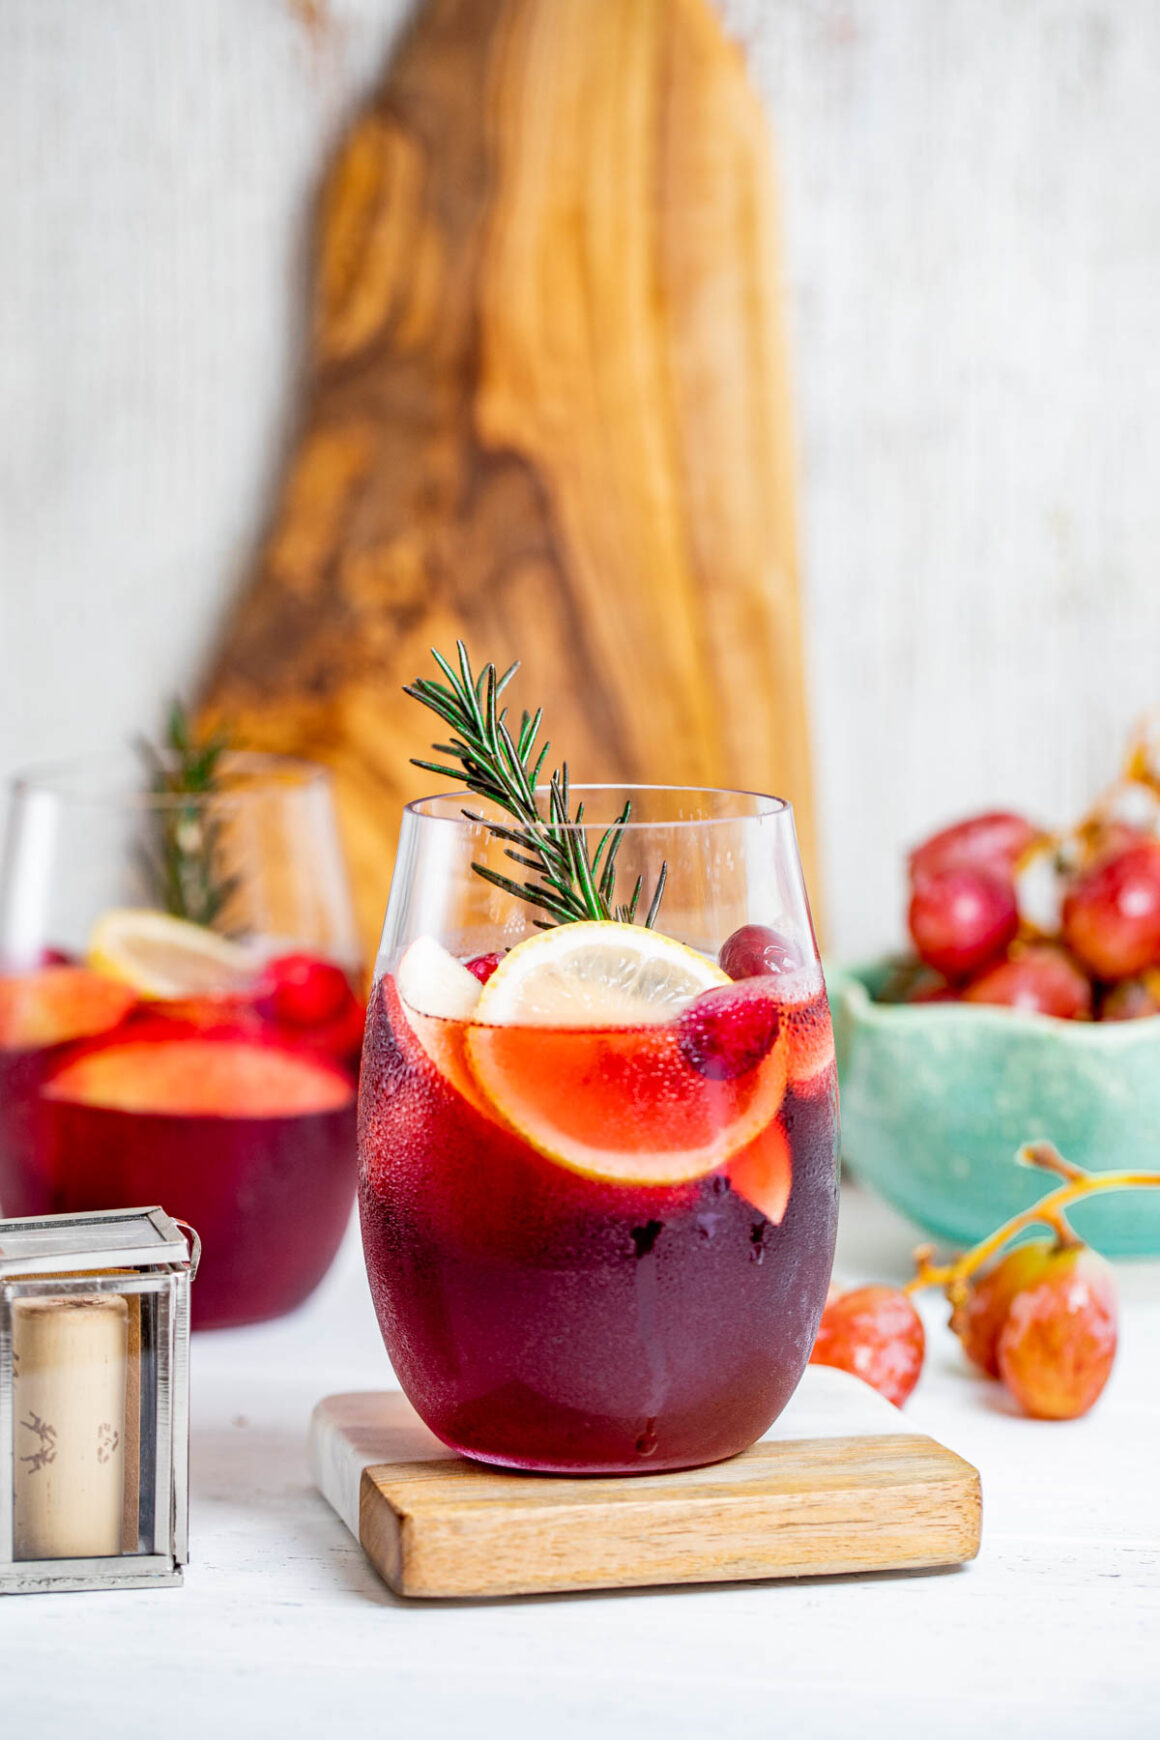 It is the perfect drink for warm summer days and festive gatherings.